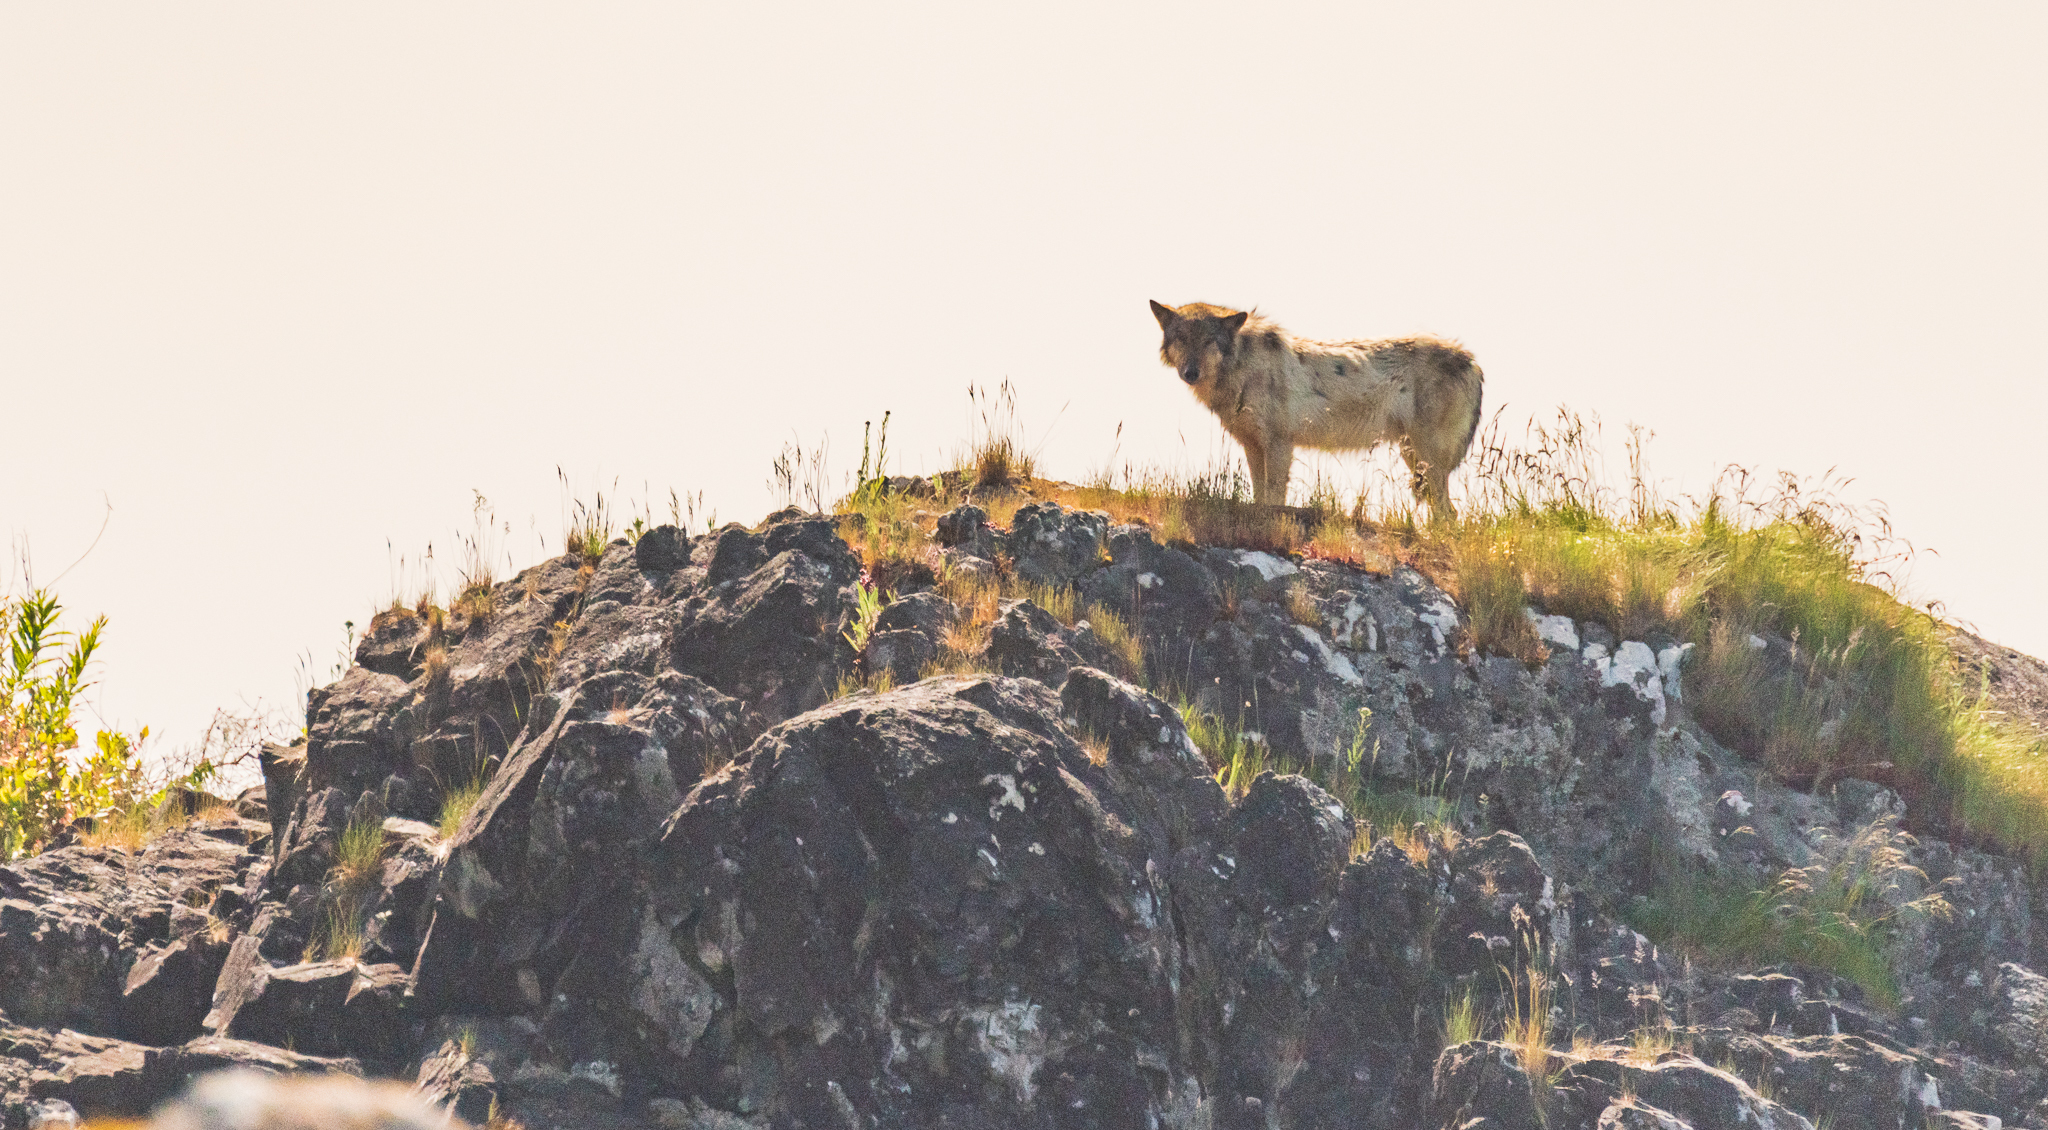 Sea Wolf Standing on Grass-Covered Rock in Coastal BC